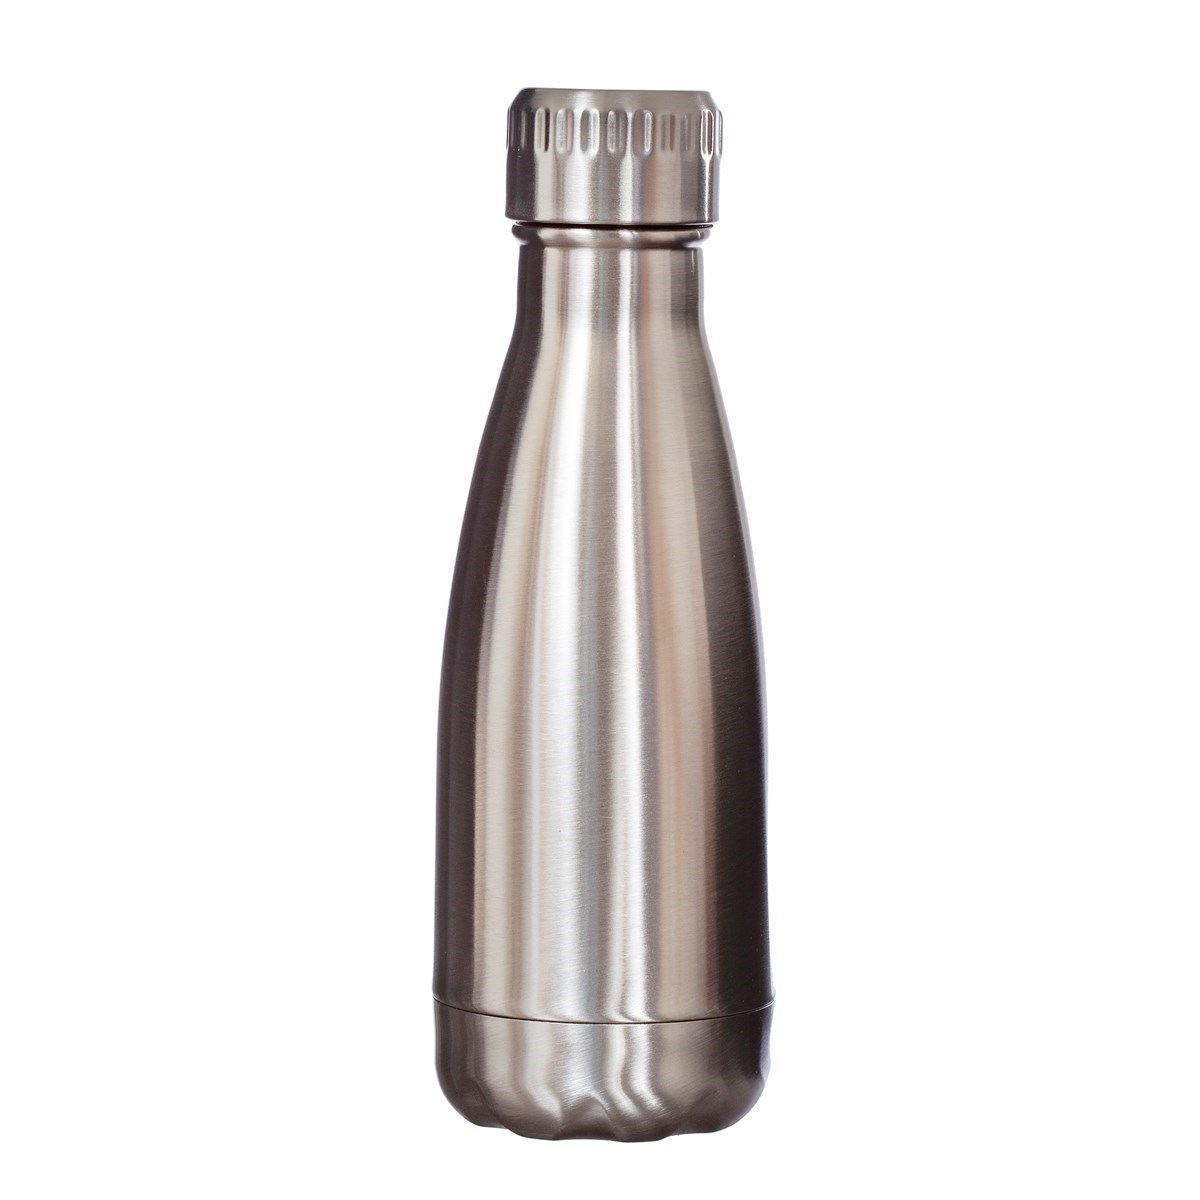 https://www.sassandbelle.co.uk/Images/Product/Default/xlarge/ZIP061_A_Small_Stainless_Steel_Water_Bottle.jpg